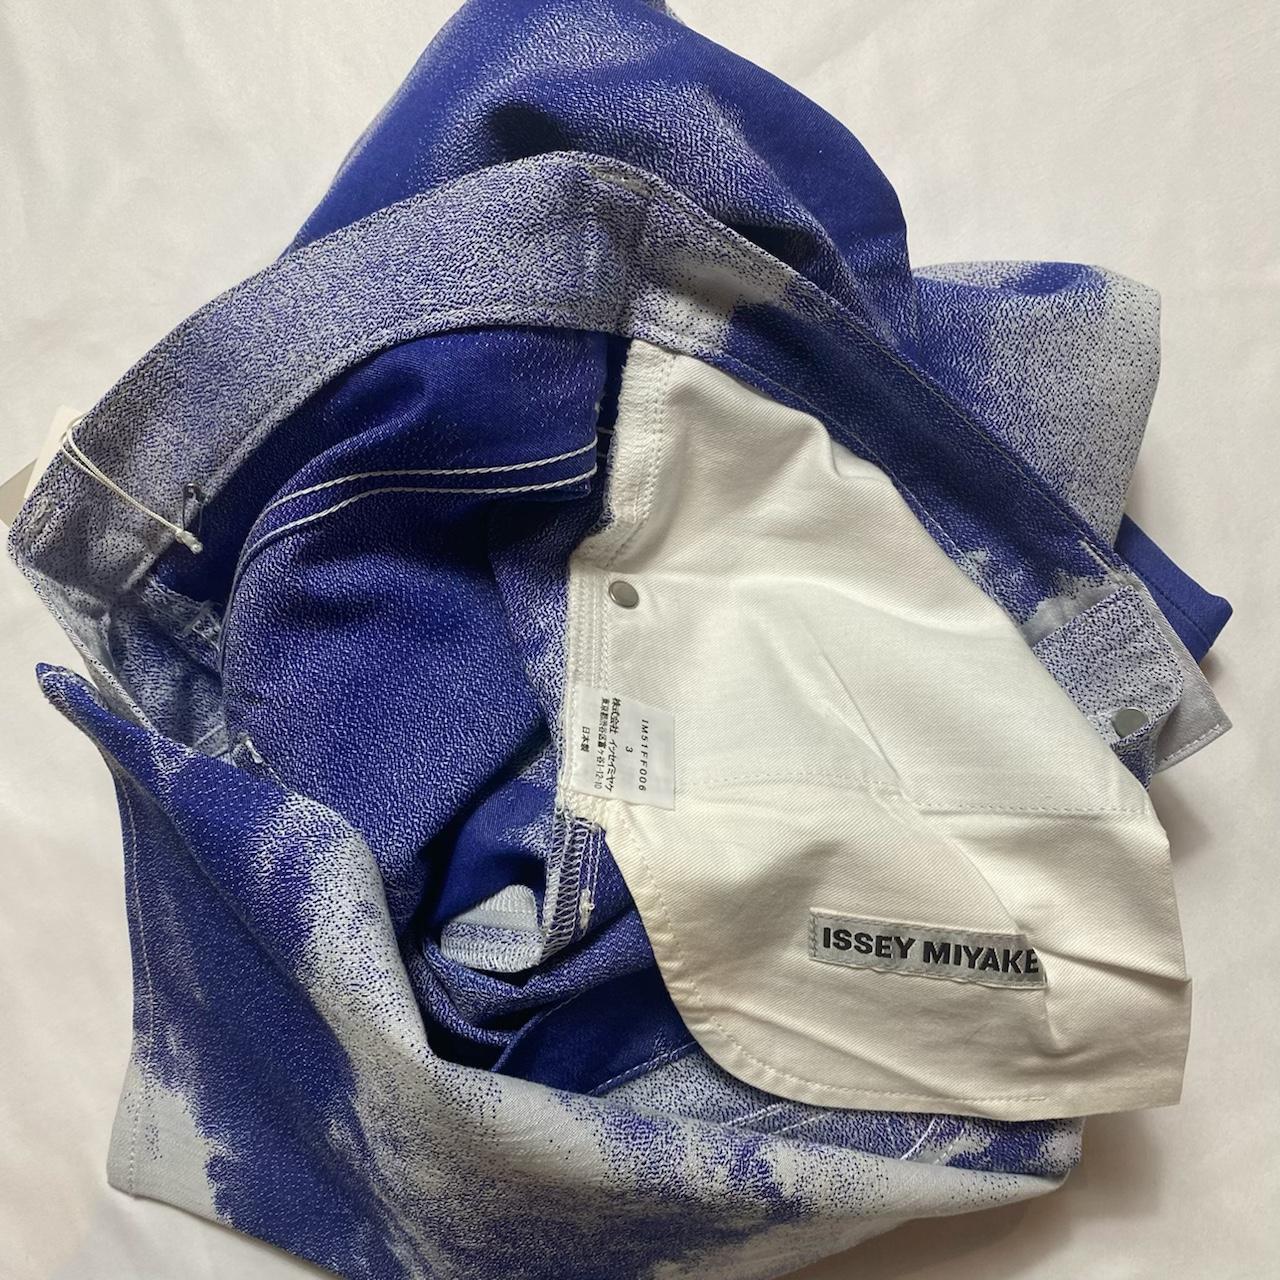 Issey Miyake Men's White and Blue Jeans (3)